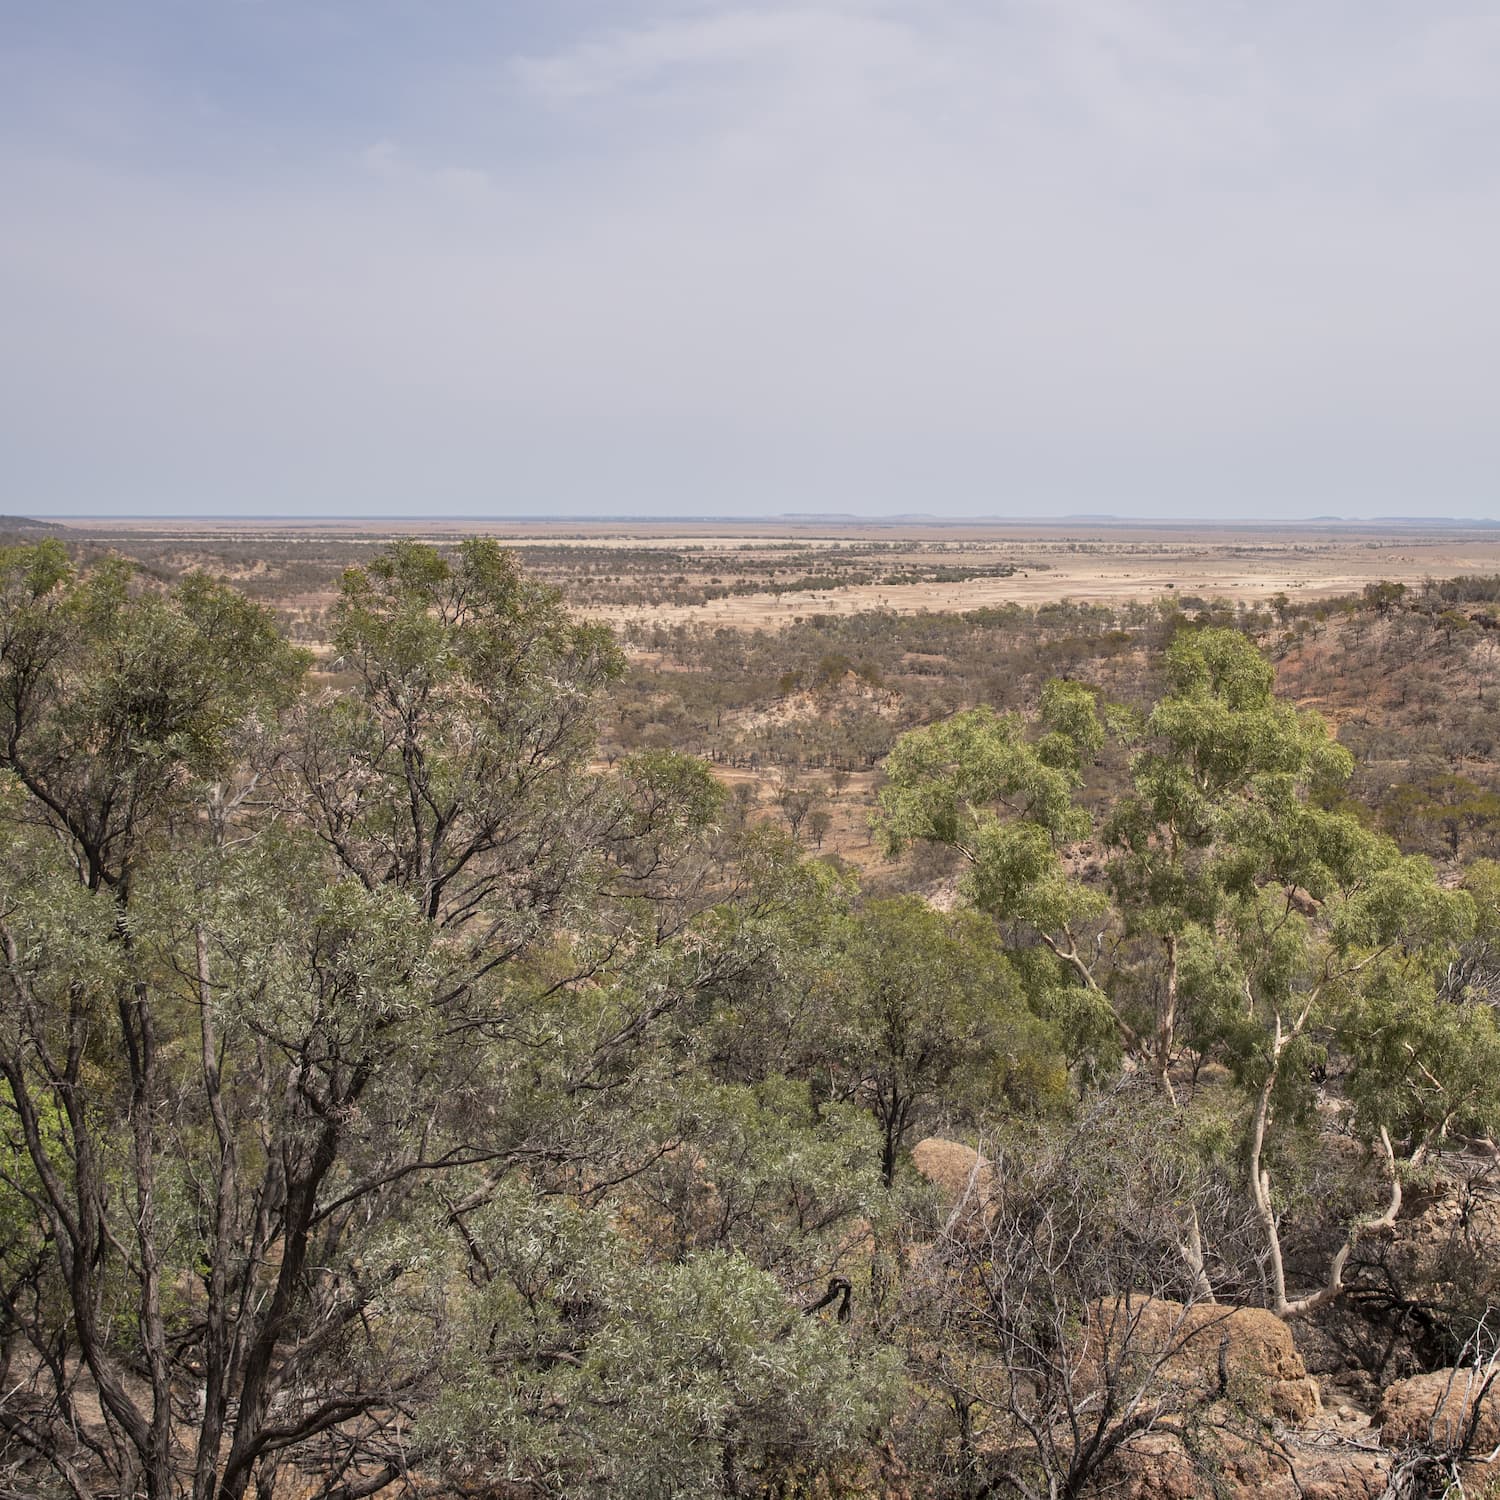 View across the Winton outback landscape